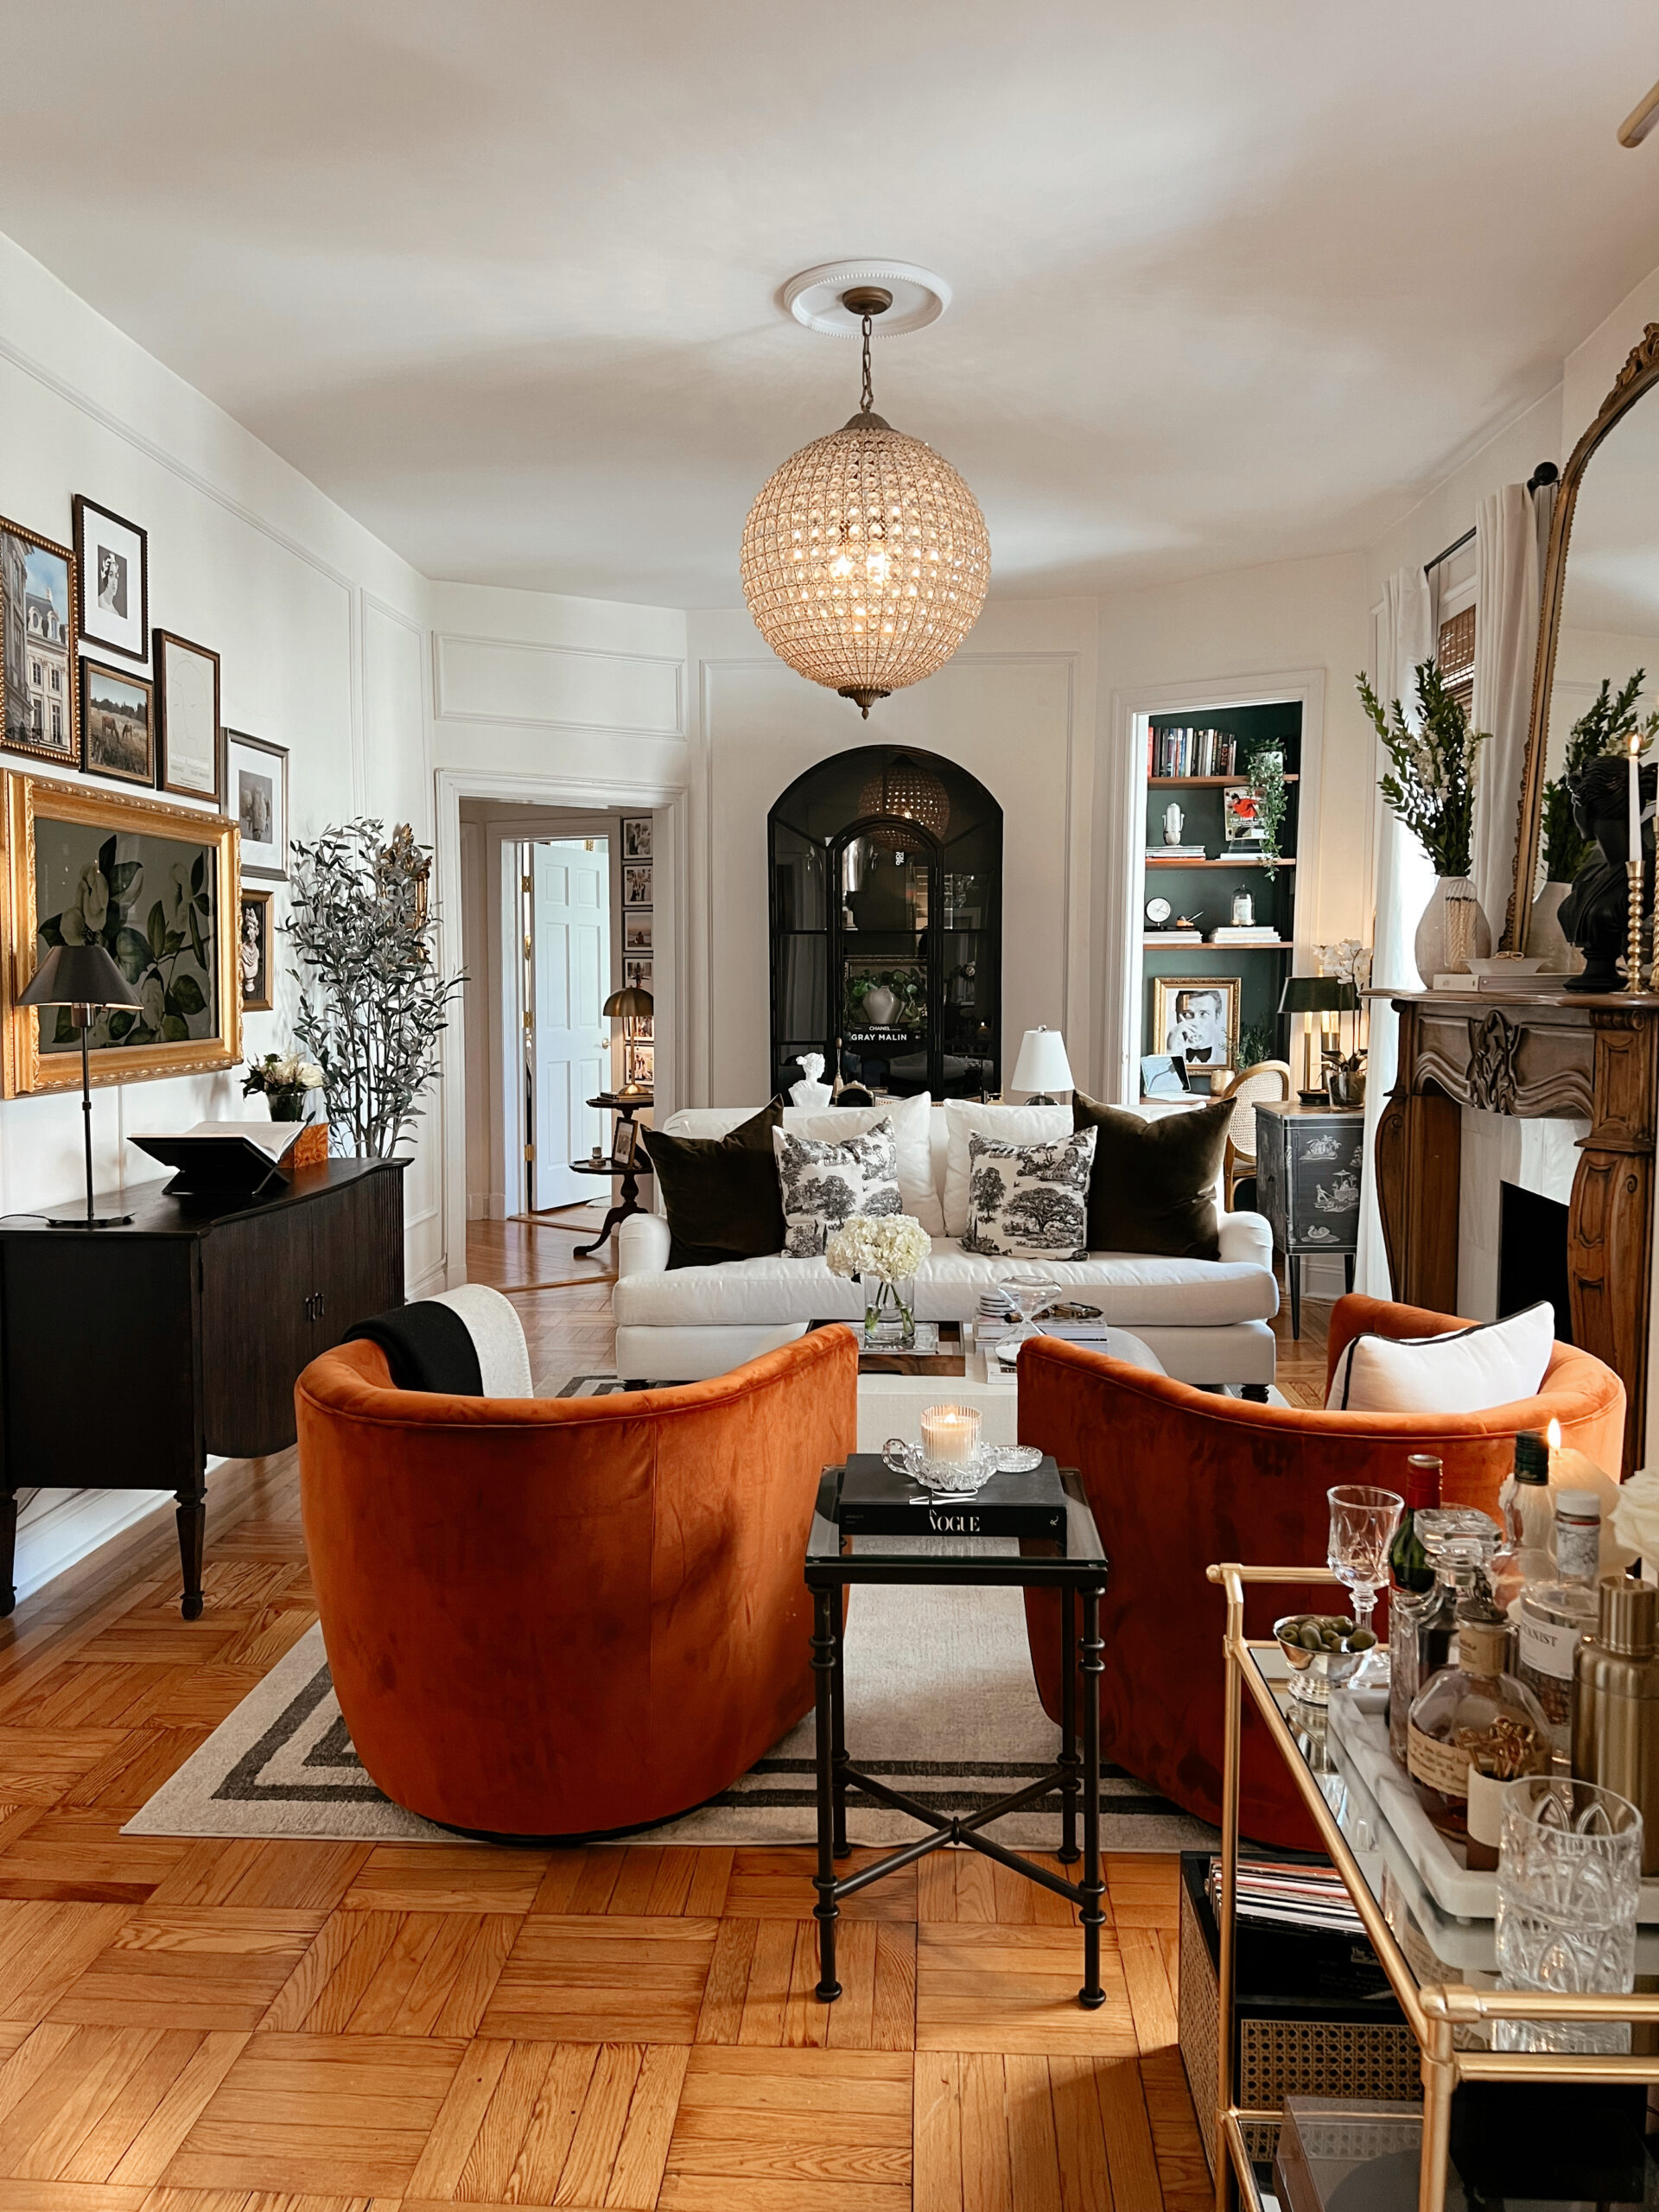 Anna's living room with two large orange chairs, a white couch with dark colored pillows, and a gorgeous chandelier in frame.